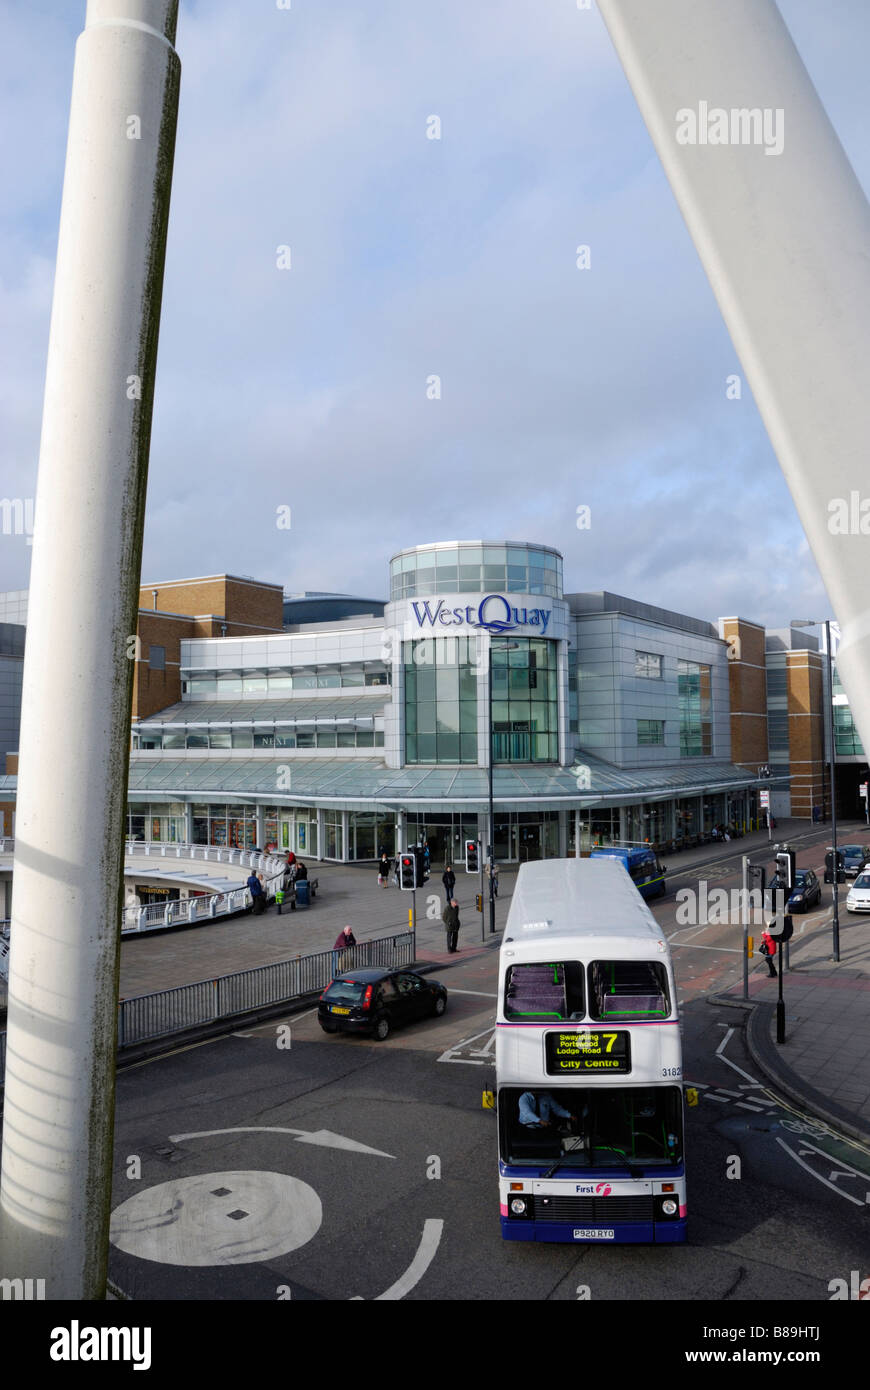 View of Southampton city centre showing a the West Quay Shopping Centre and a local bus Hampshire England Stock Photo